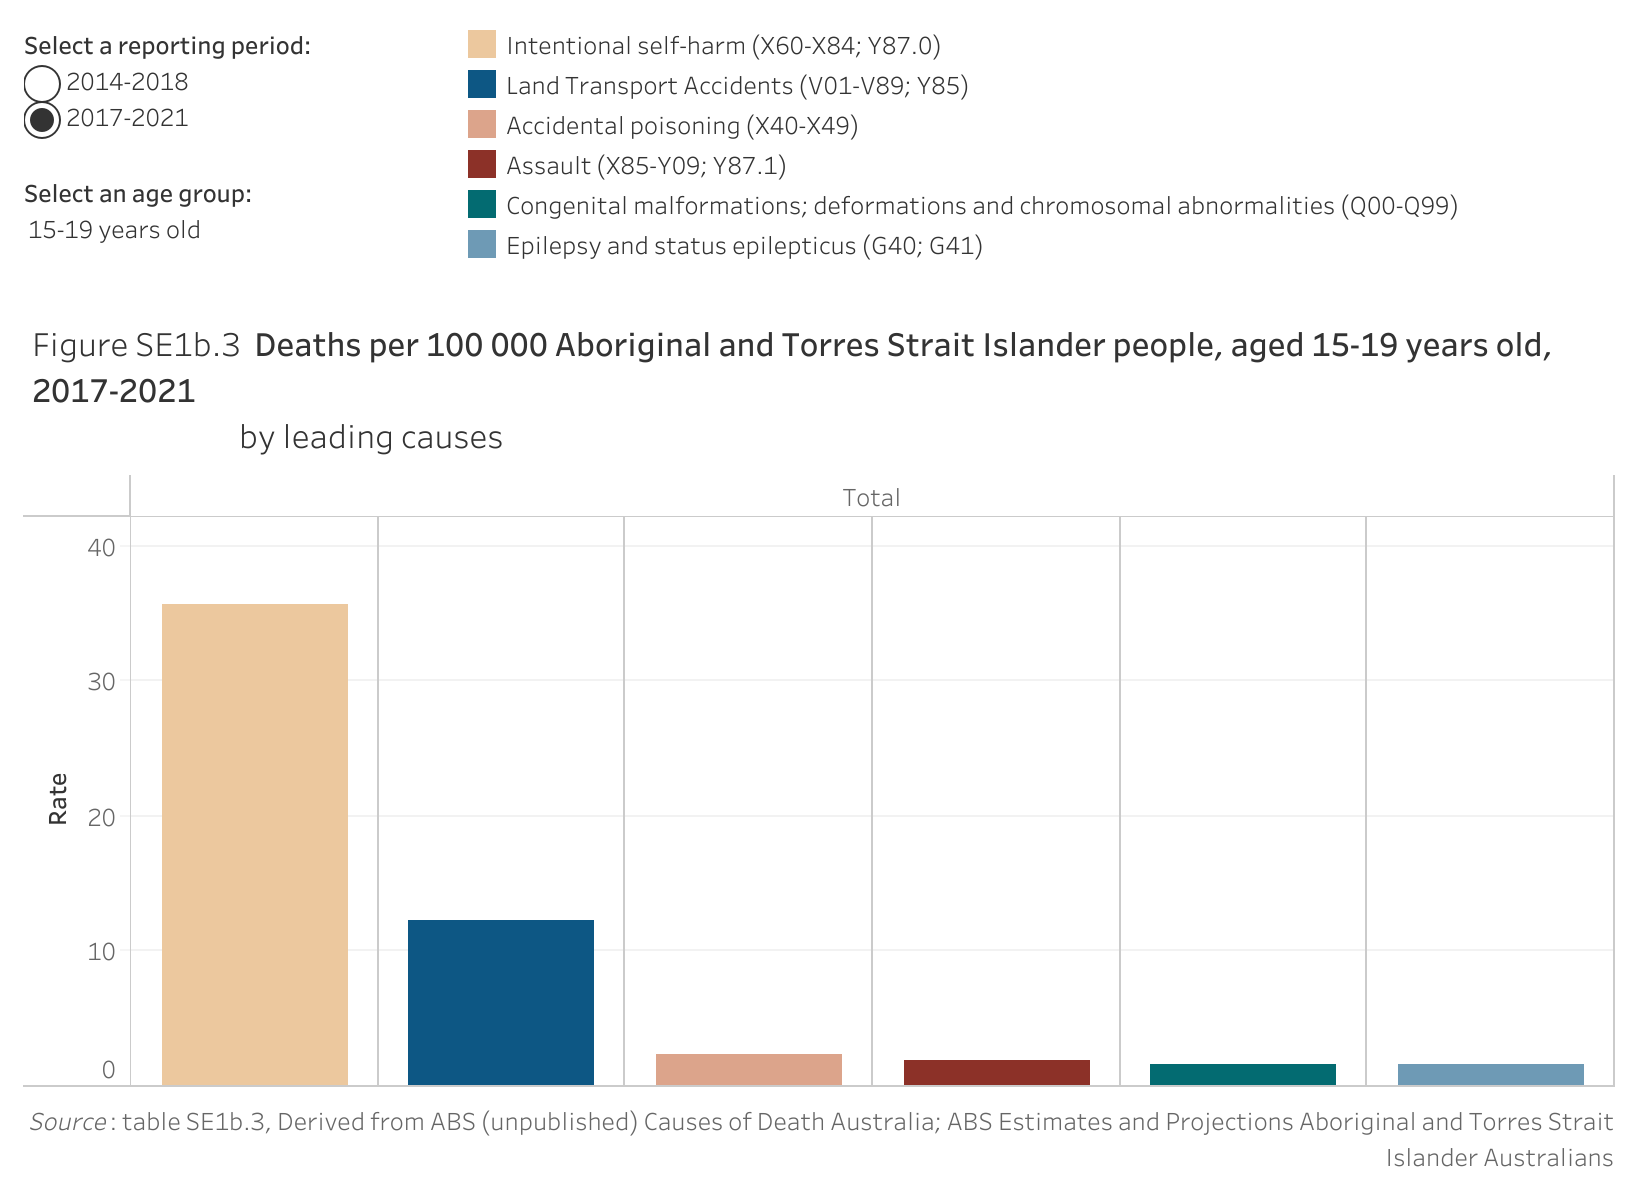 Figure SE1b.3 shows the deaths per 100 000 Aboriginal and Torres Strait Islander people, aged 15-19 years old, 2017-2021, by leading causes. More details can be found within the text near this image.